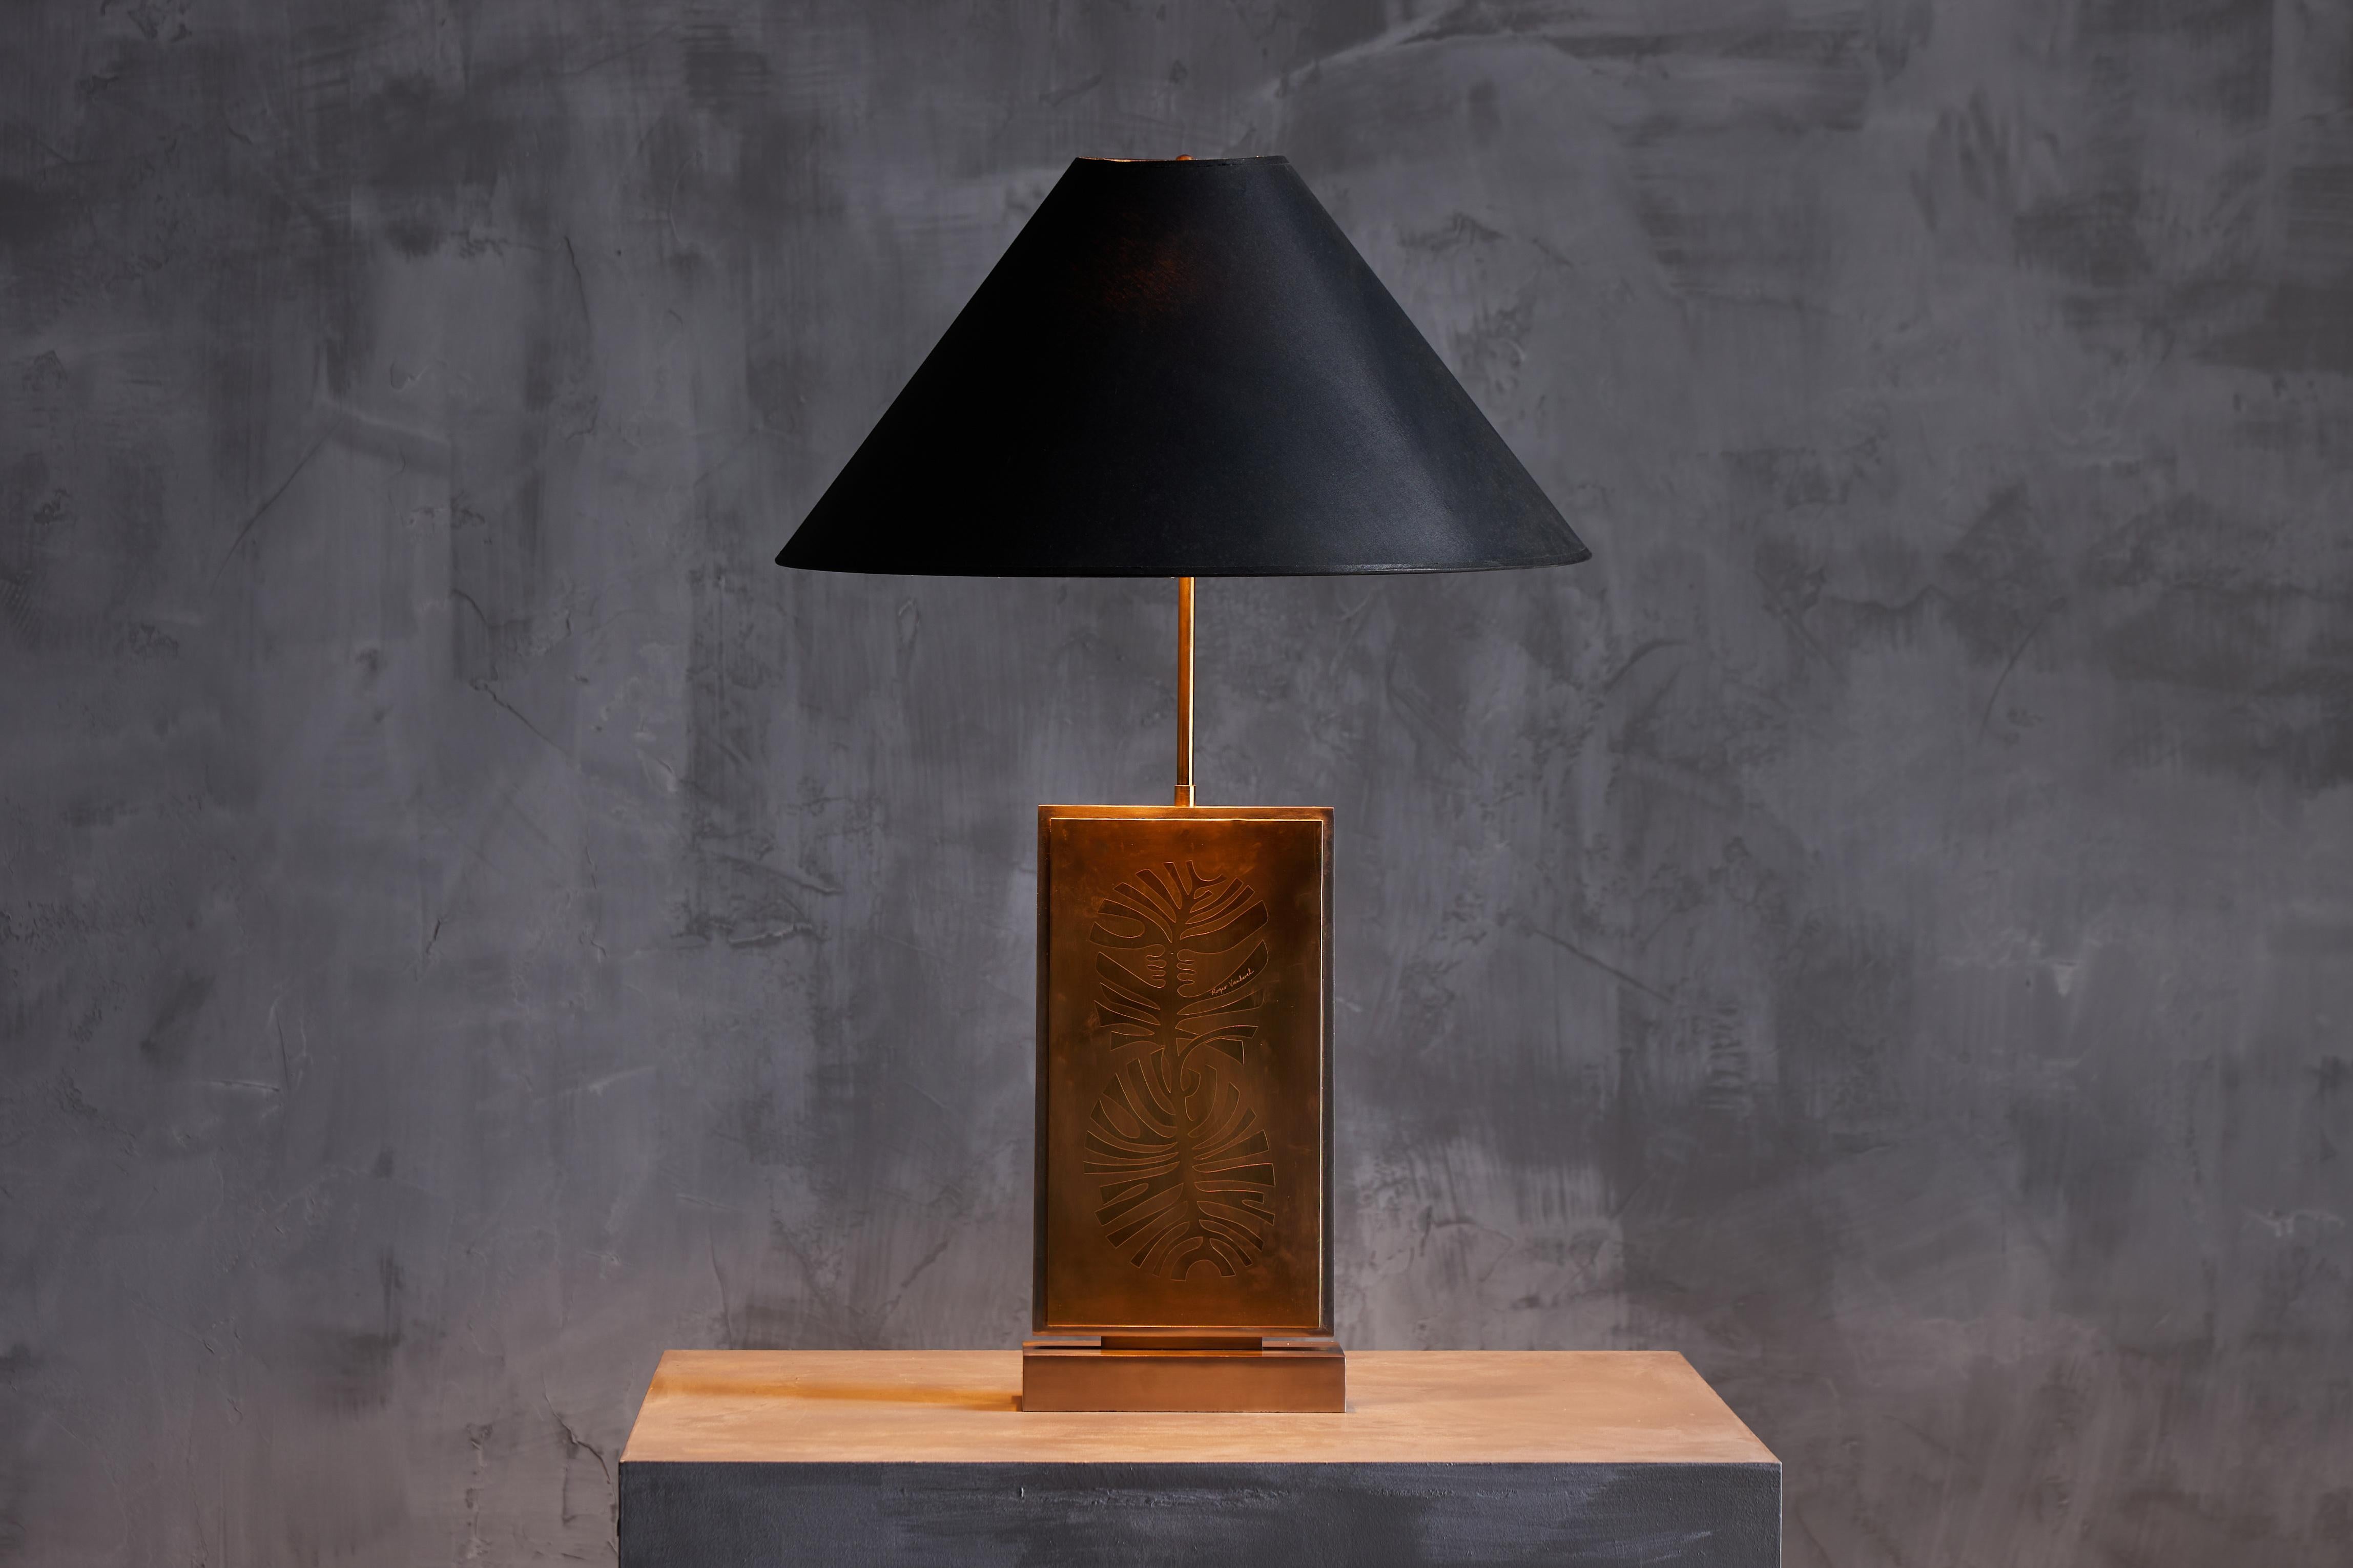 1970s table lamp crafted by the Belgian designer Roger Vanhevel. Featuring a stunning brass etched artwork base personally signed by the artist himself, this lamp radiates sophistication and individuality. Its stainless steel chromed base makes it a